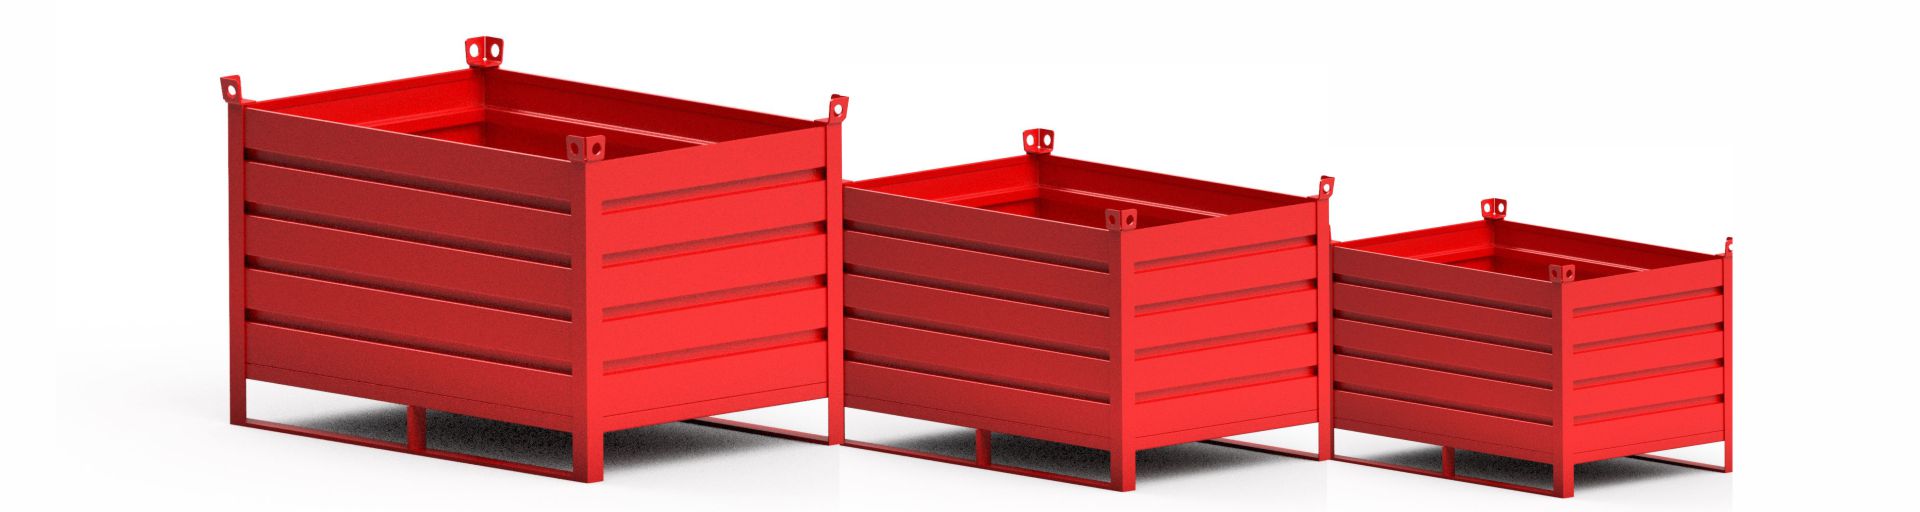 Sheet metal containers